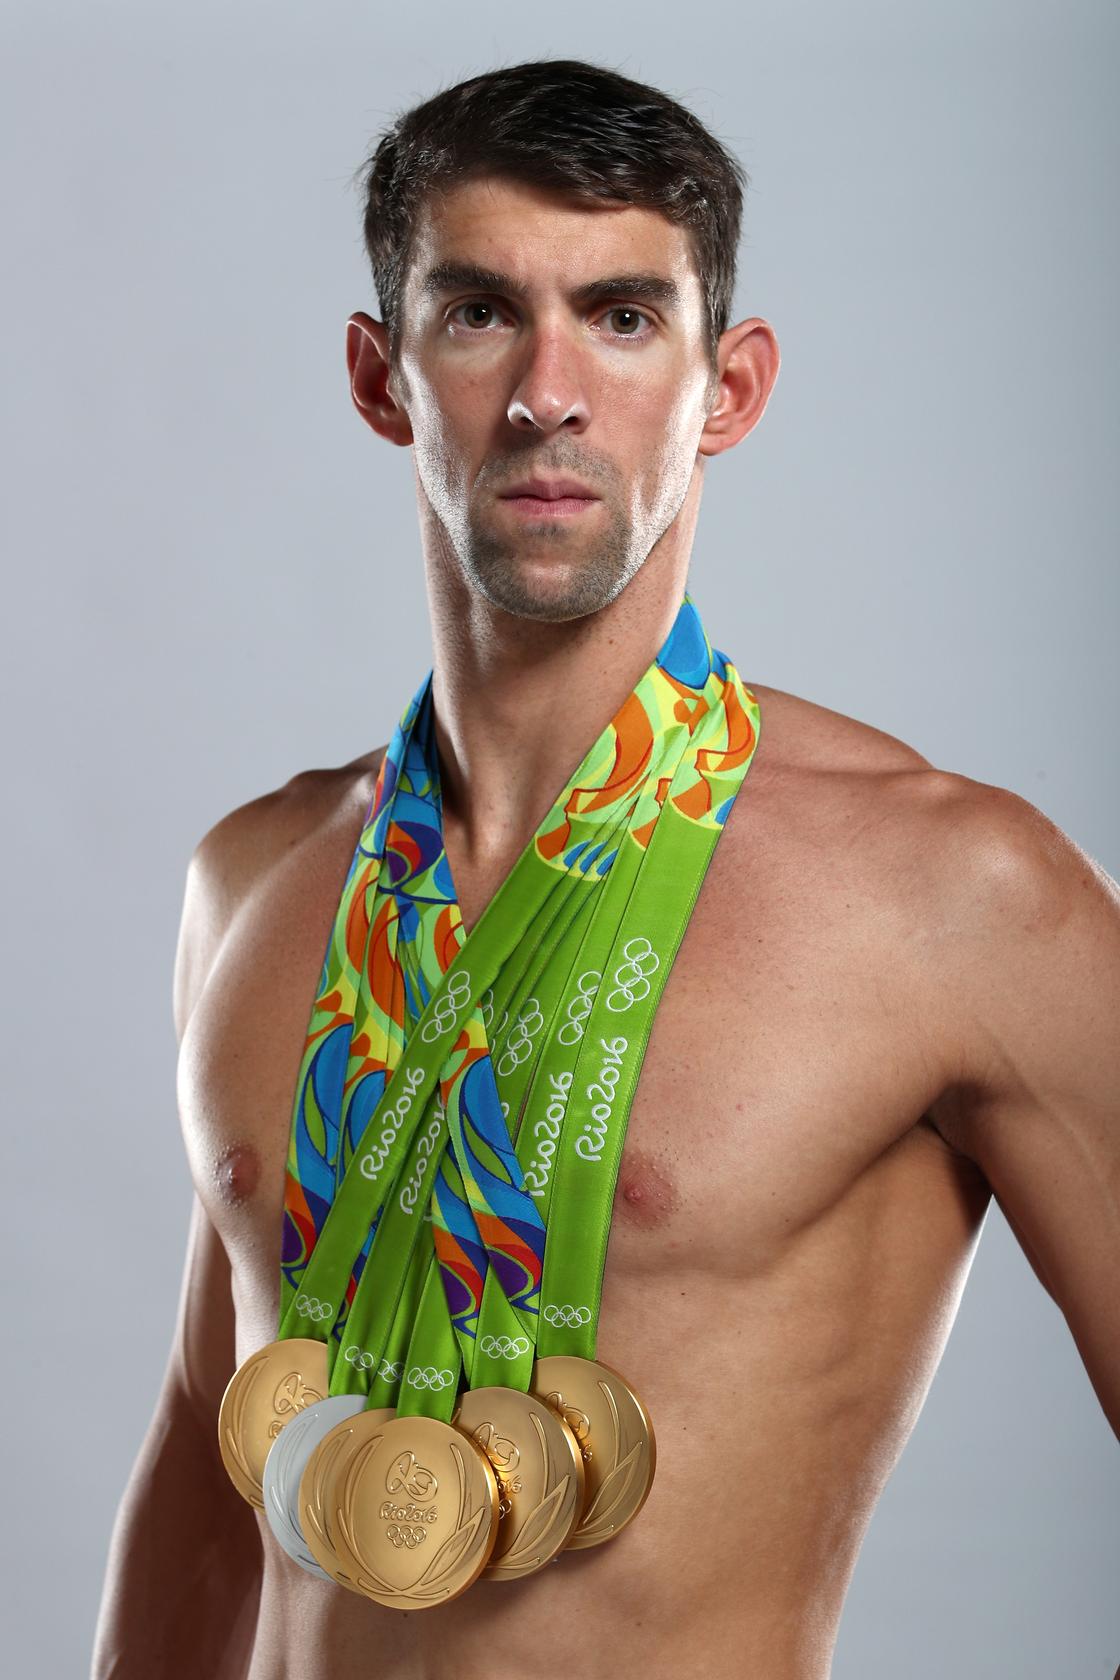 Michael Phelps' net worth, wife, height, medals, age, career earnings